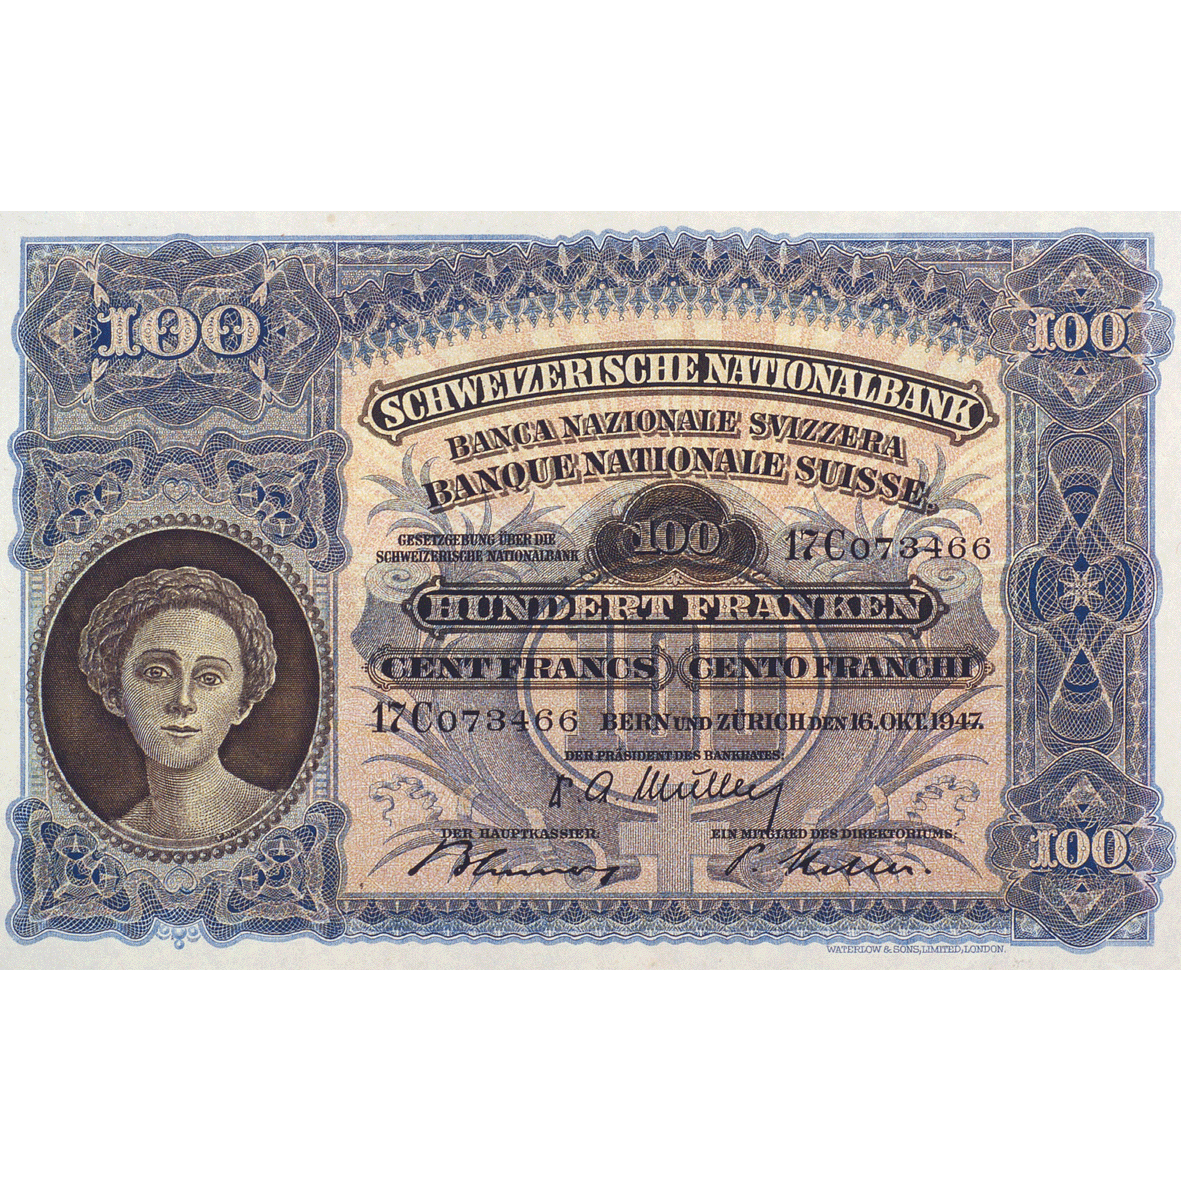 Swiss Confederation, 100 Francs (2nd Banknote Series, in Circulation 1911-1980) (obverse)